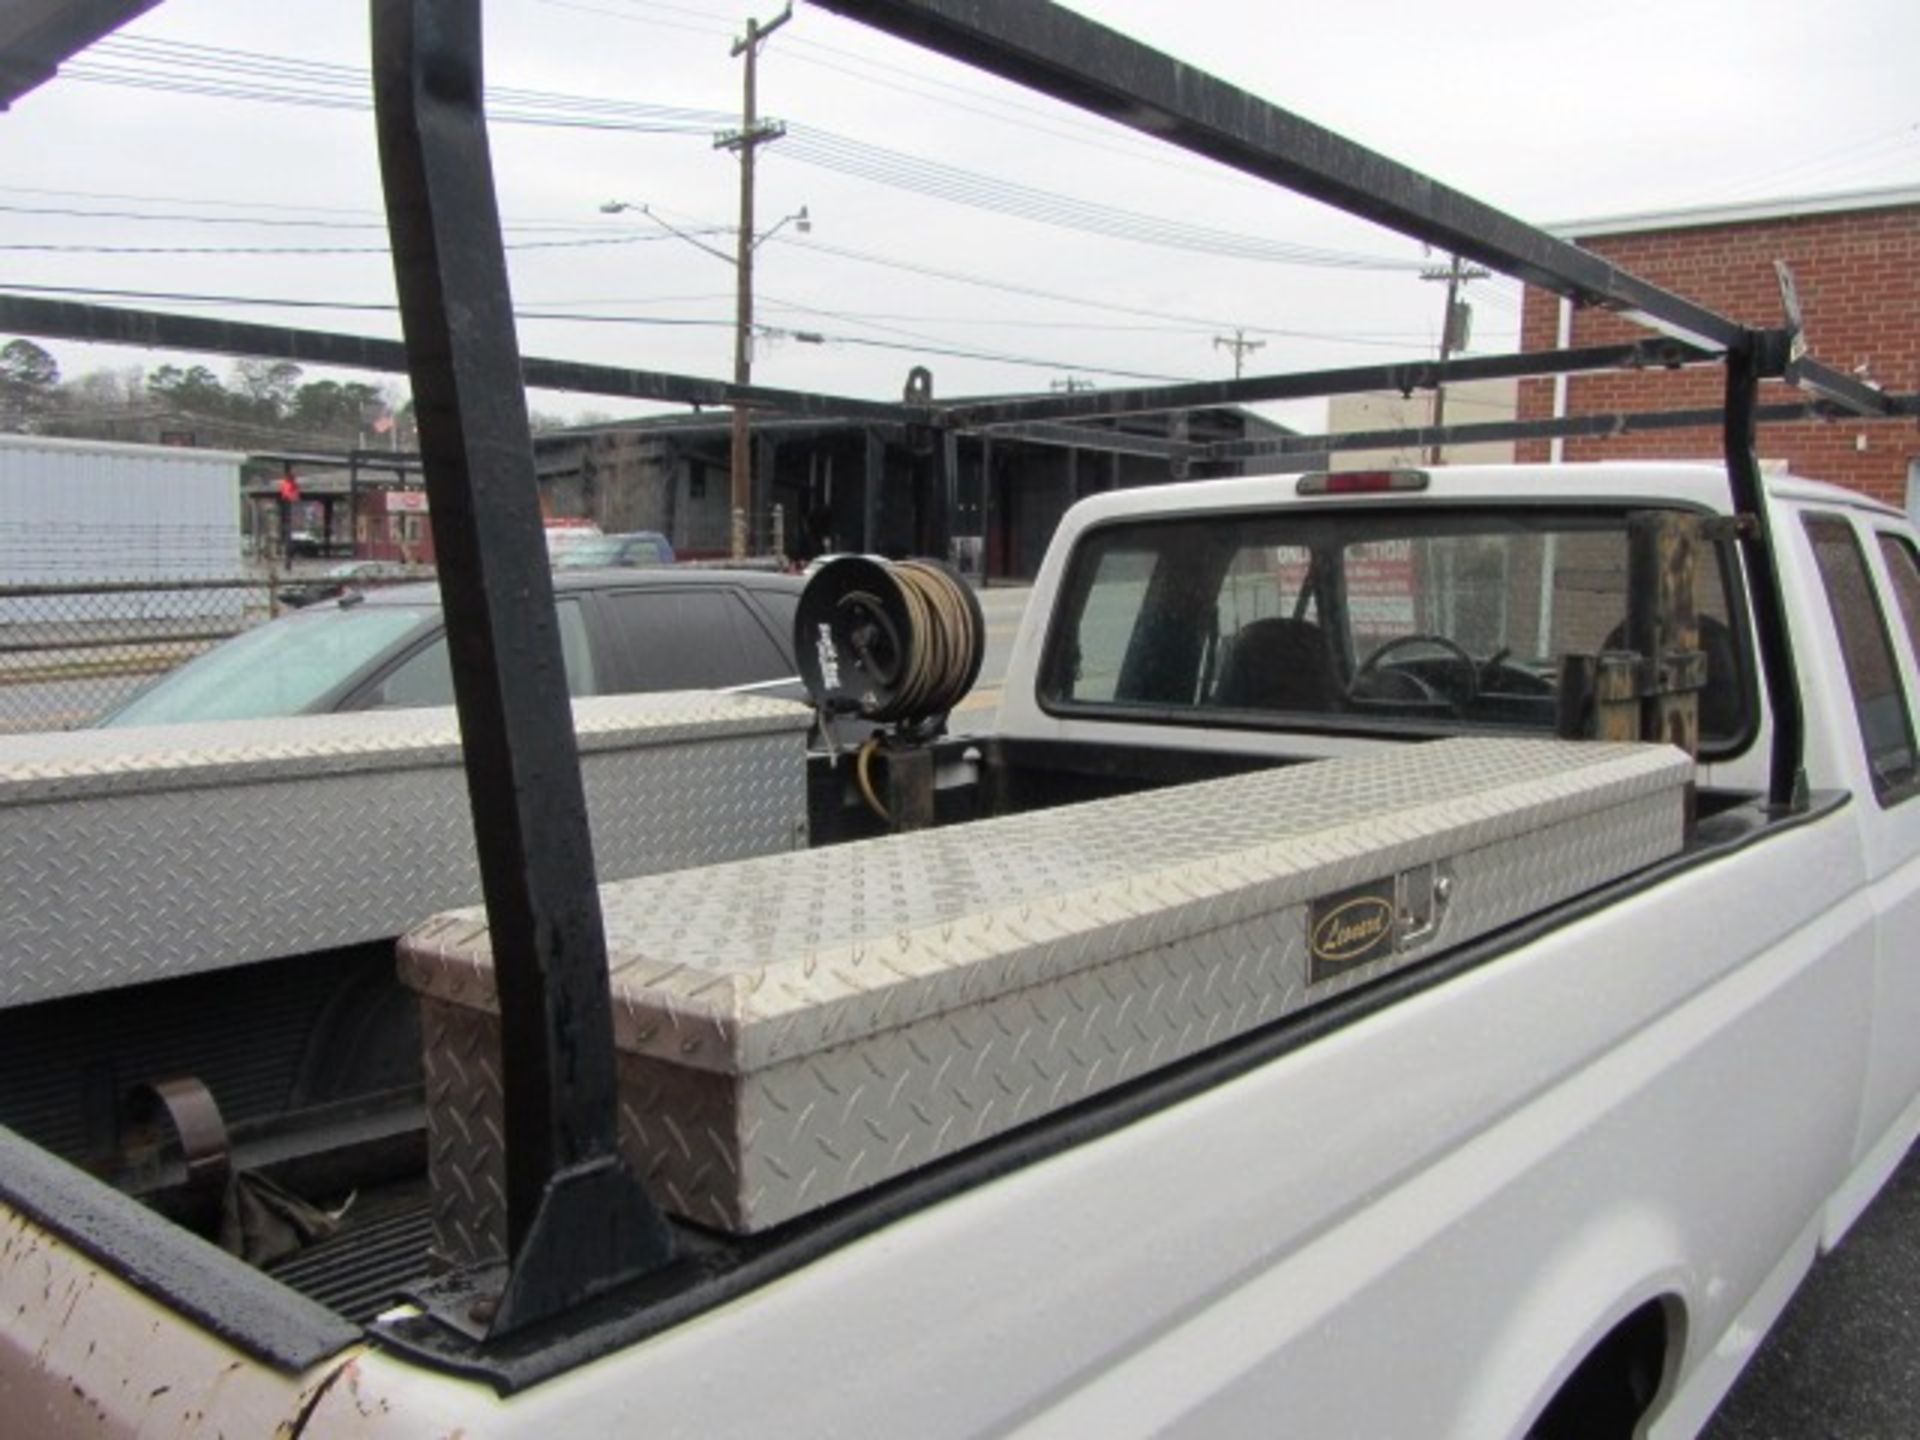 Ford F250 Heavy Duty Pick-Up Truck with Extended Cab, Aluminum Work Boxes, Work Bed, Dual Gas Tanks, - Image 4 of 5